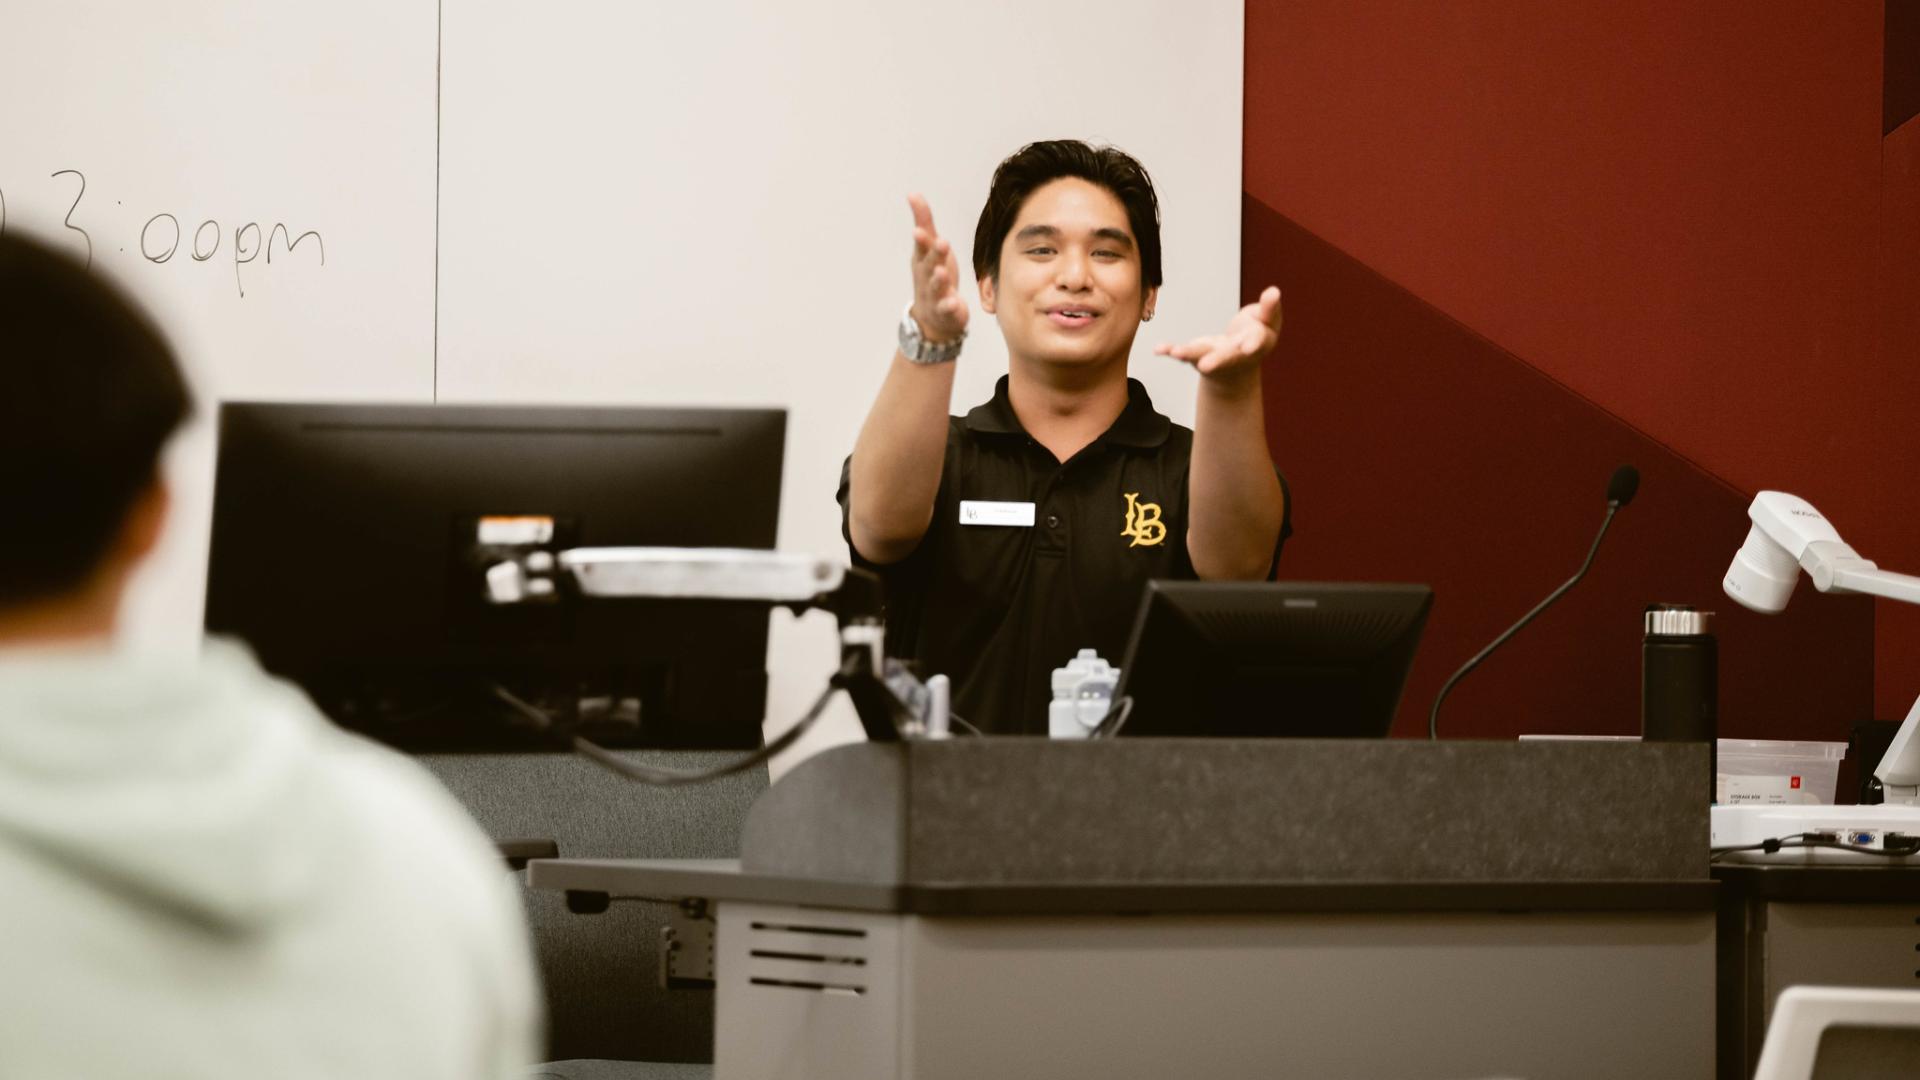 A student leader standing at a podium in a classroom, gesturing with their hands while speaking to the audience.